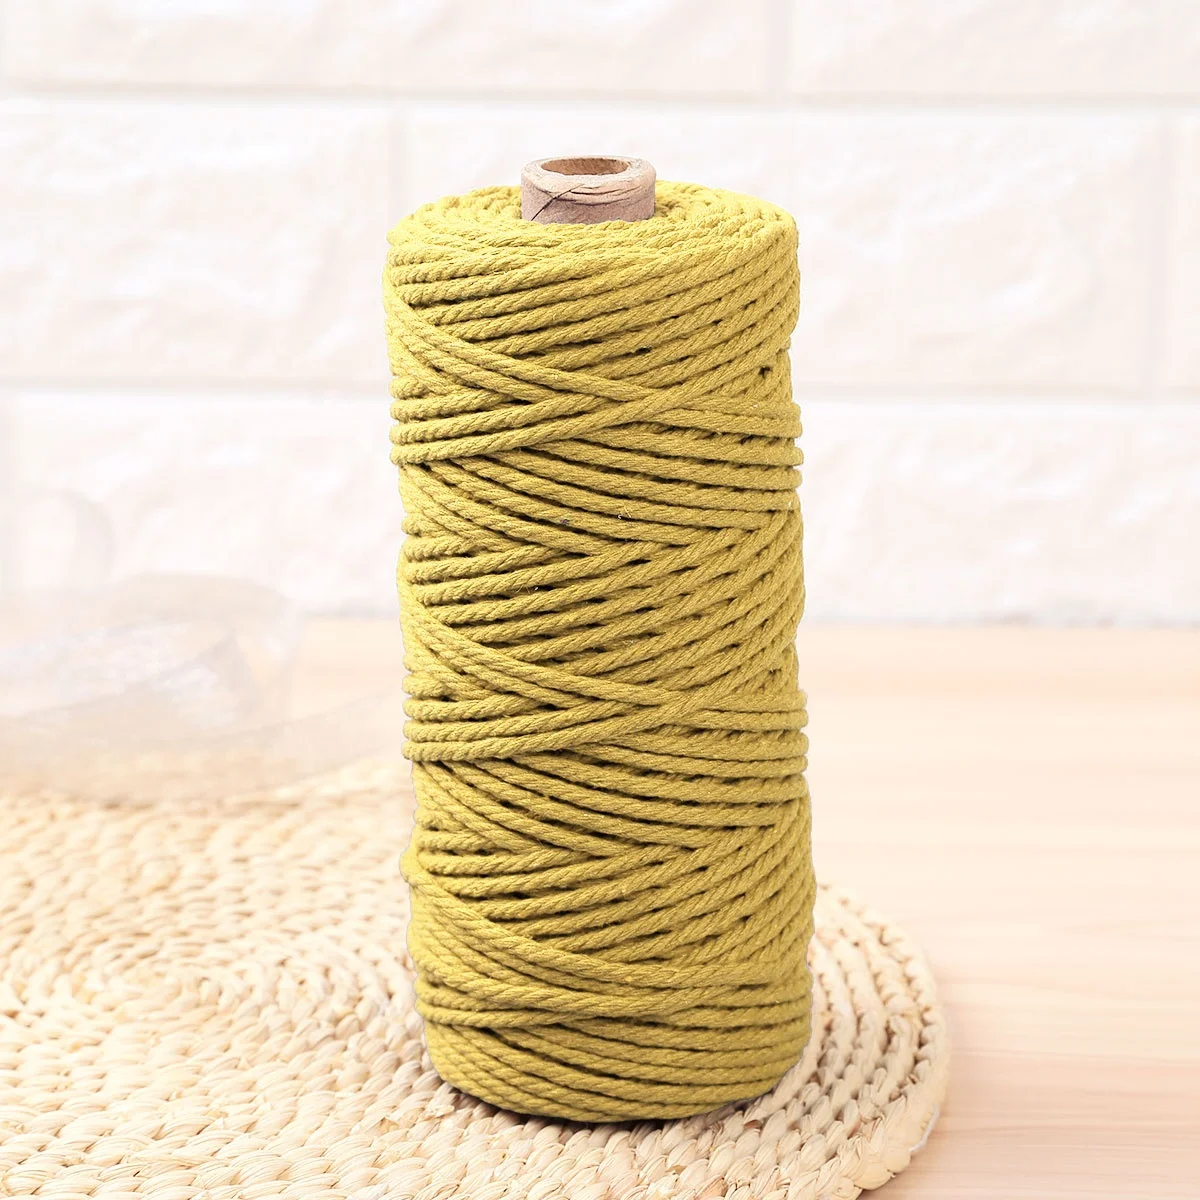 
Cotton Cord Colorful Cord Rope Natural 4 Strand Twisted Craft Macrame String DIY Home Textile Wedding Decorative Supply 